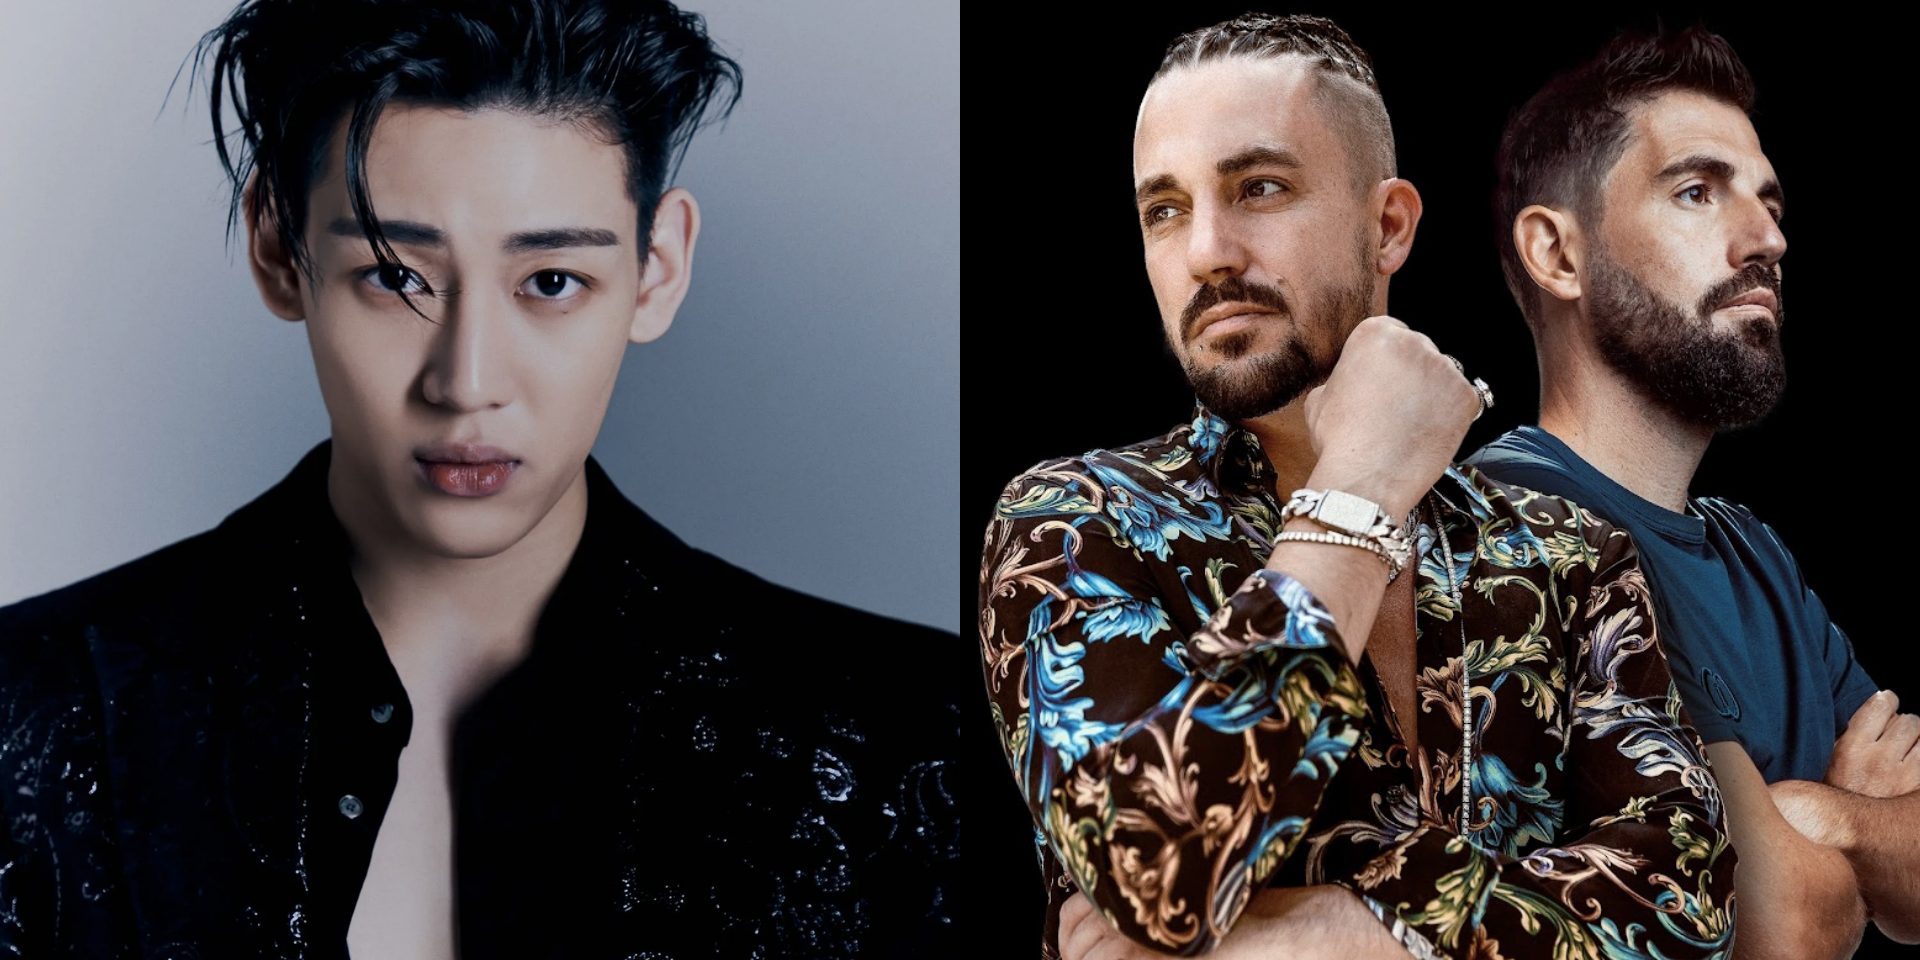 BamBam and Dimitri & Like Mike to headline 'HYPETYPE' metaverse concert this August